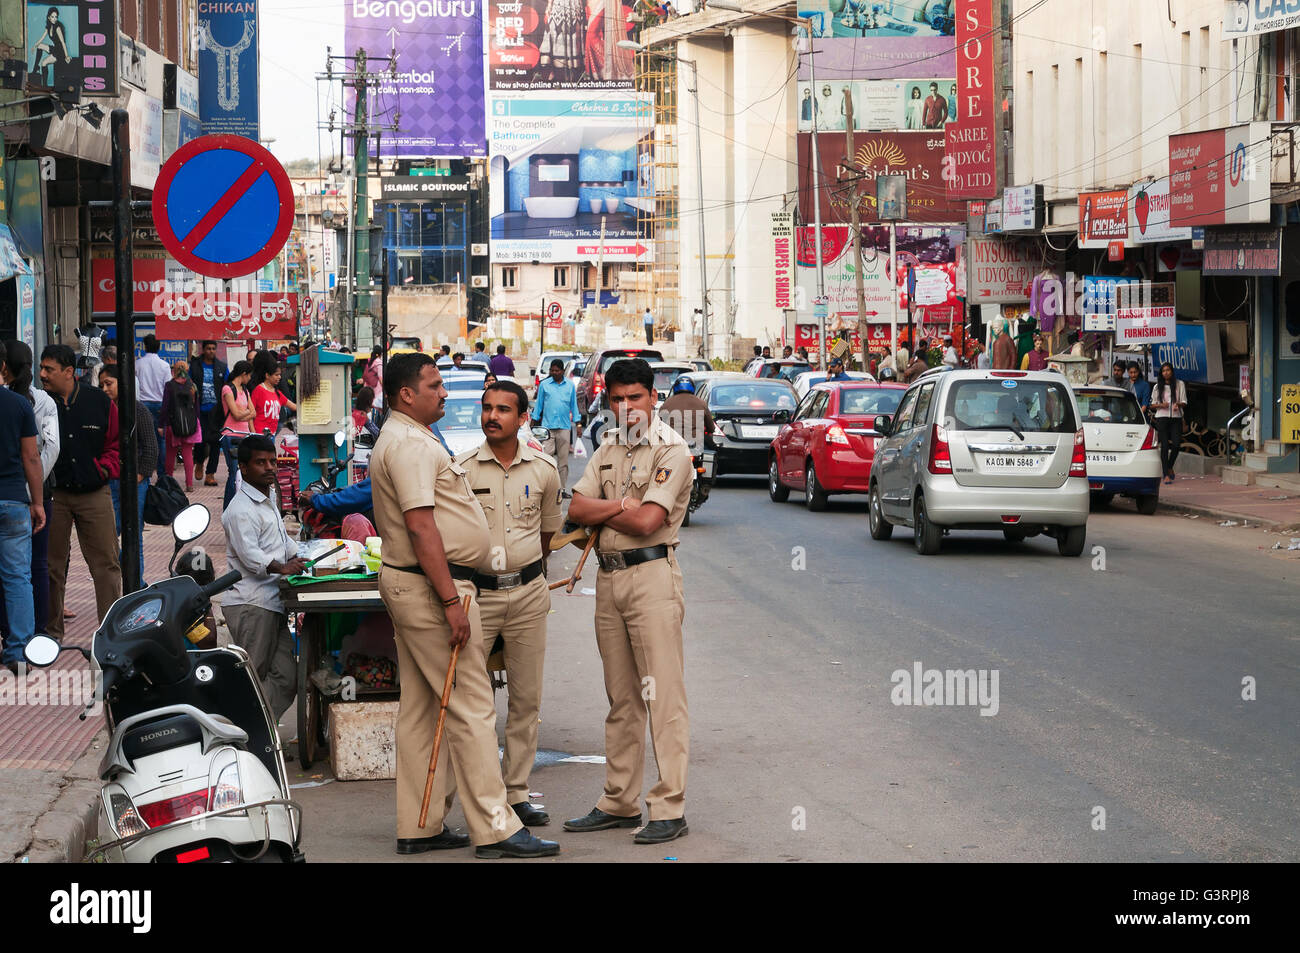 Policemen on Commercial street. Commercial street in Bangalore is one of the main shopping comp Stock Photo